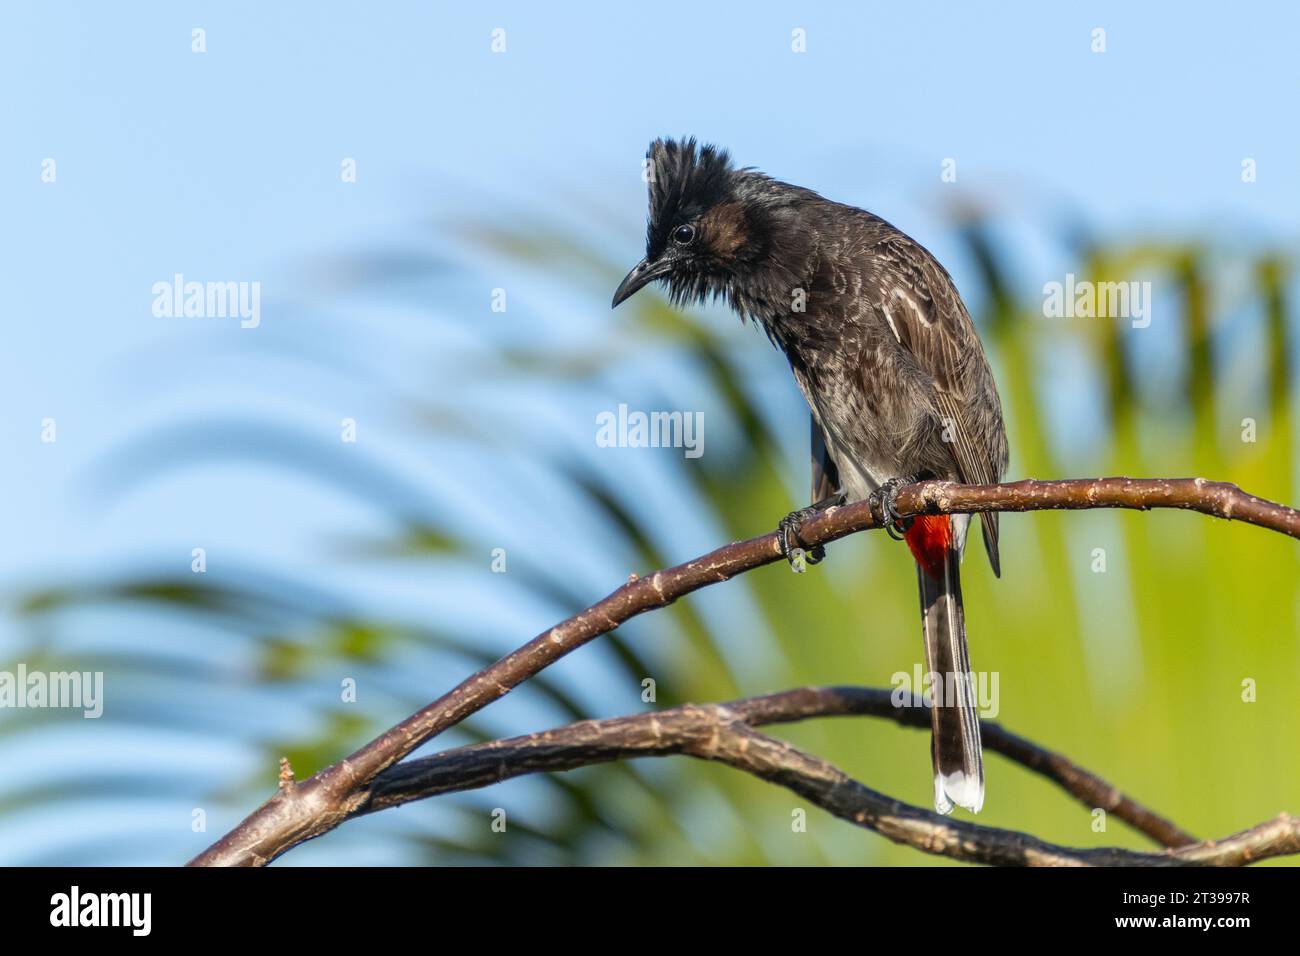 Red vented bulbul on branch Stock Photo